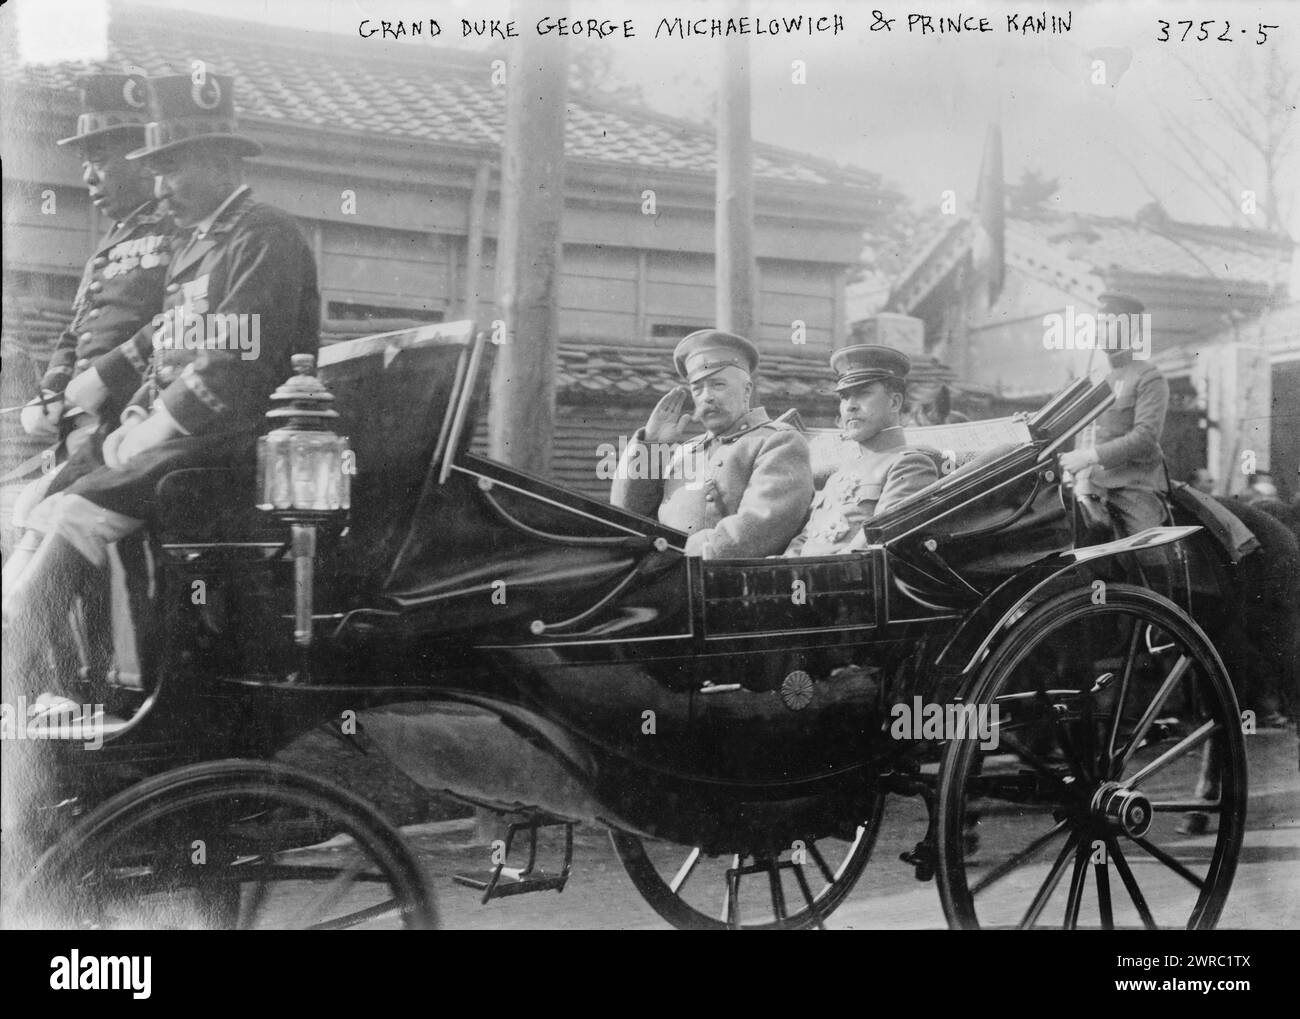 Grand Duke George Michaelowich & Prince Kanin, Photograph shows Prince Kan'in Kotohito (1865-1945), a member of the Japanese Imperial family riding in a carriage with Grand Duke George Mikhailovich of Russia (1863-1919). Grand Duke Mikhailovich visited Japan in January of 1916 in relation to the Russo-Japanese Agreement of 1916., 1916 Jan., Glass negatives, 1 negative: glass Stock Photo